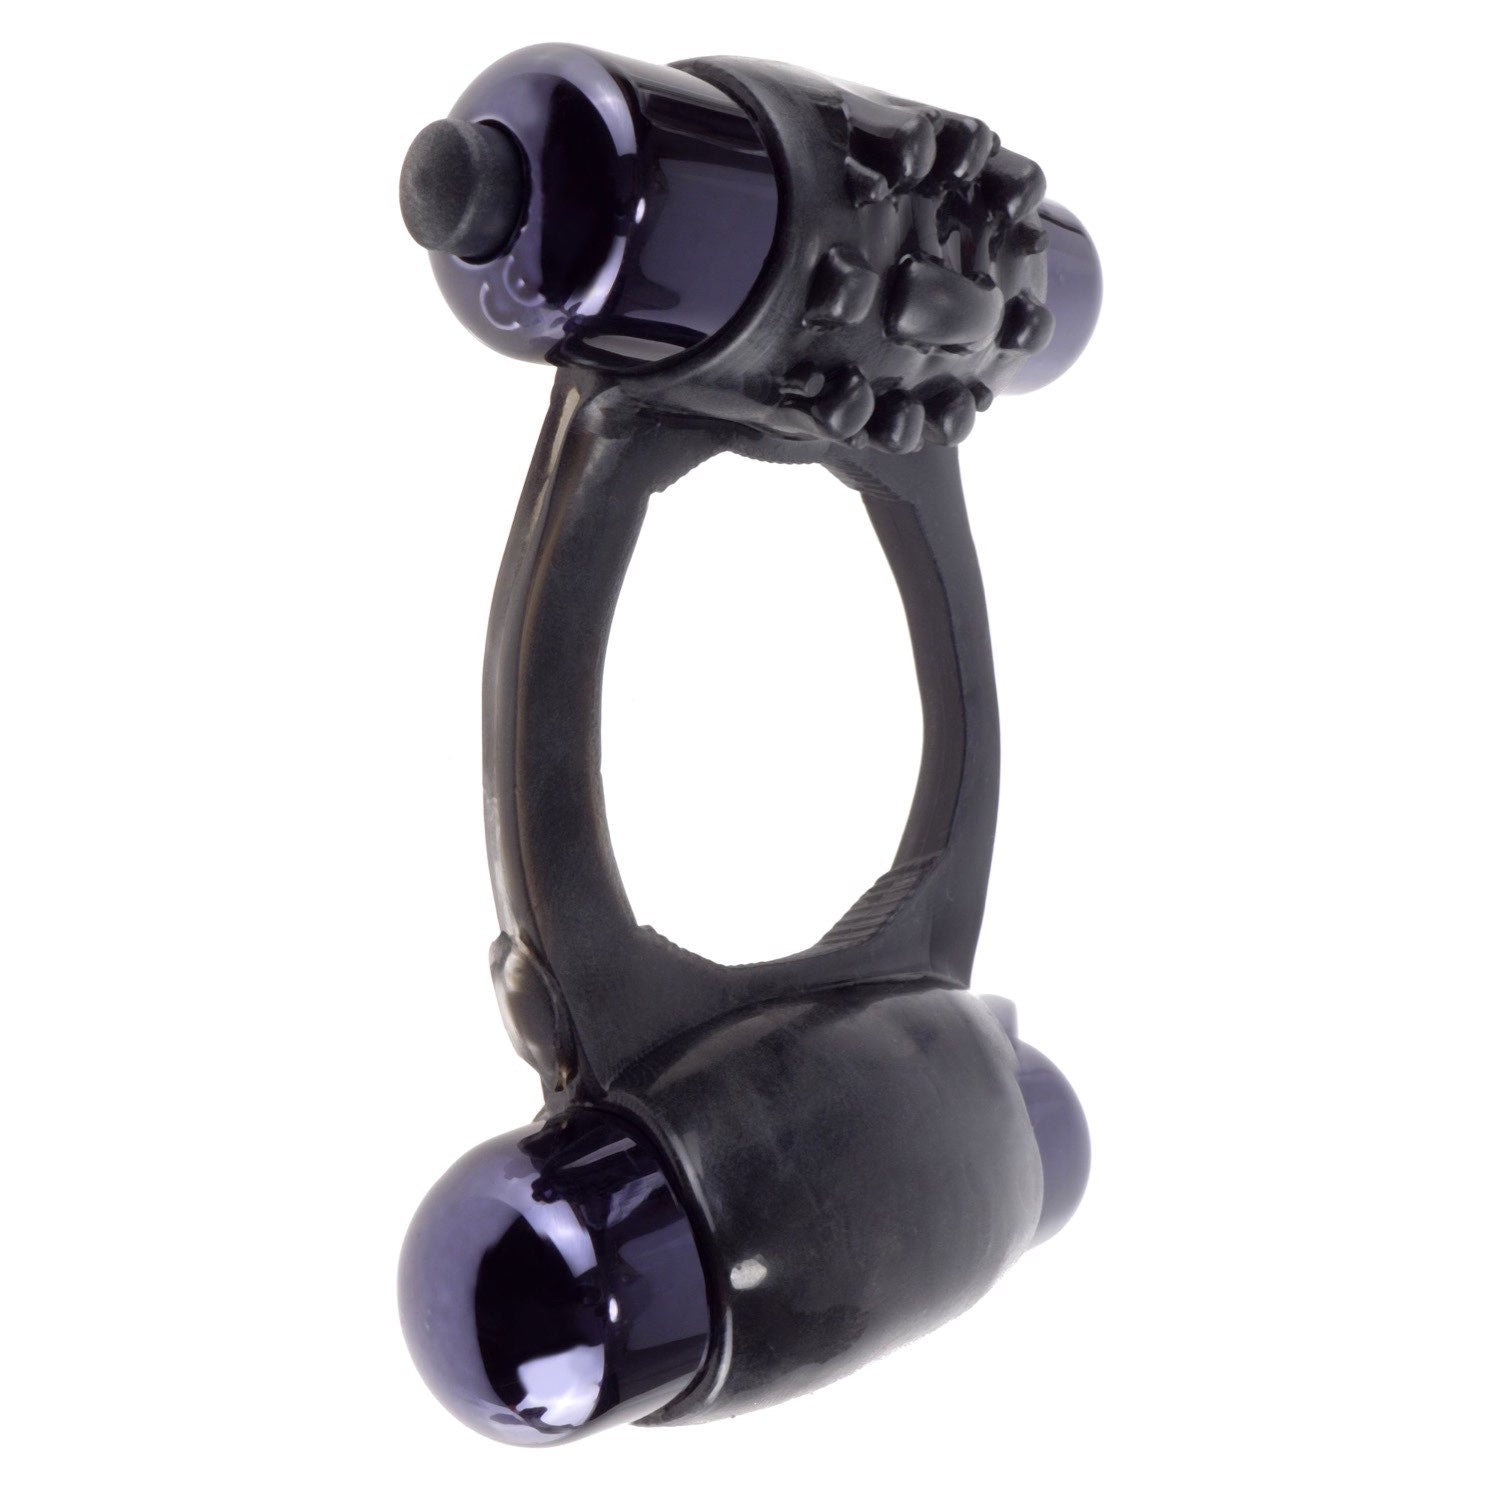 Fantasy C-Ringz Duo-Vibrating Super Ring - Black Dual Vibrating Cock Ring by Pipedream